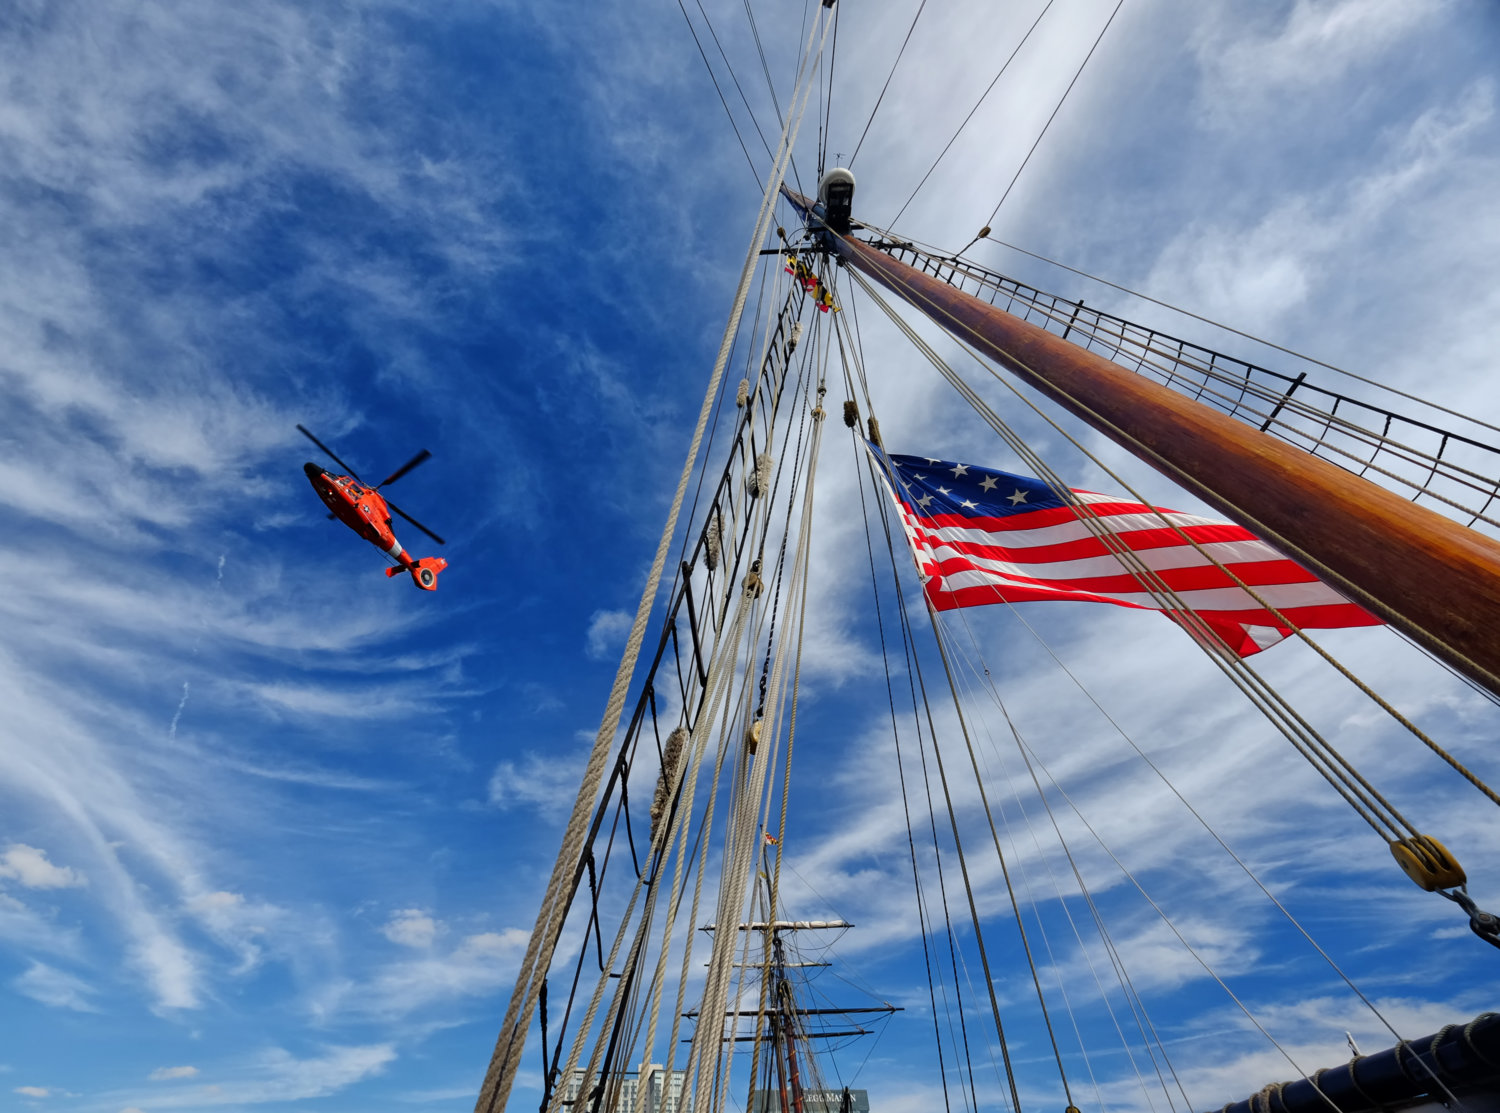 Coast Guard Helicopter and Tall Ship